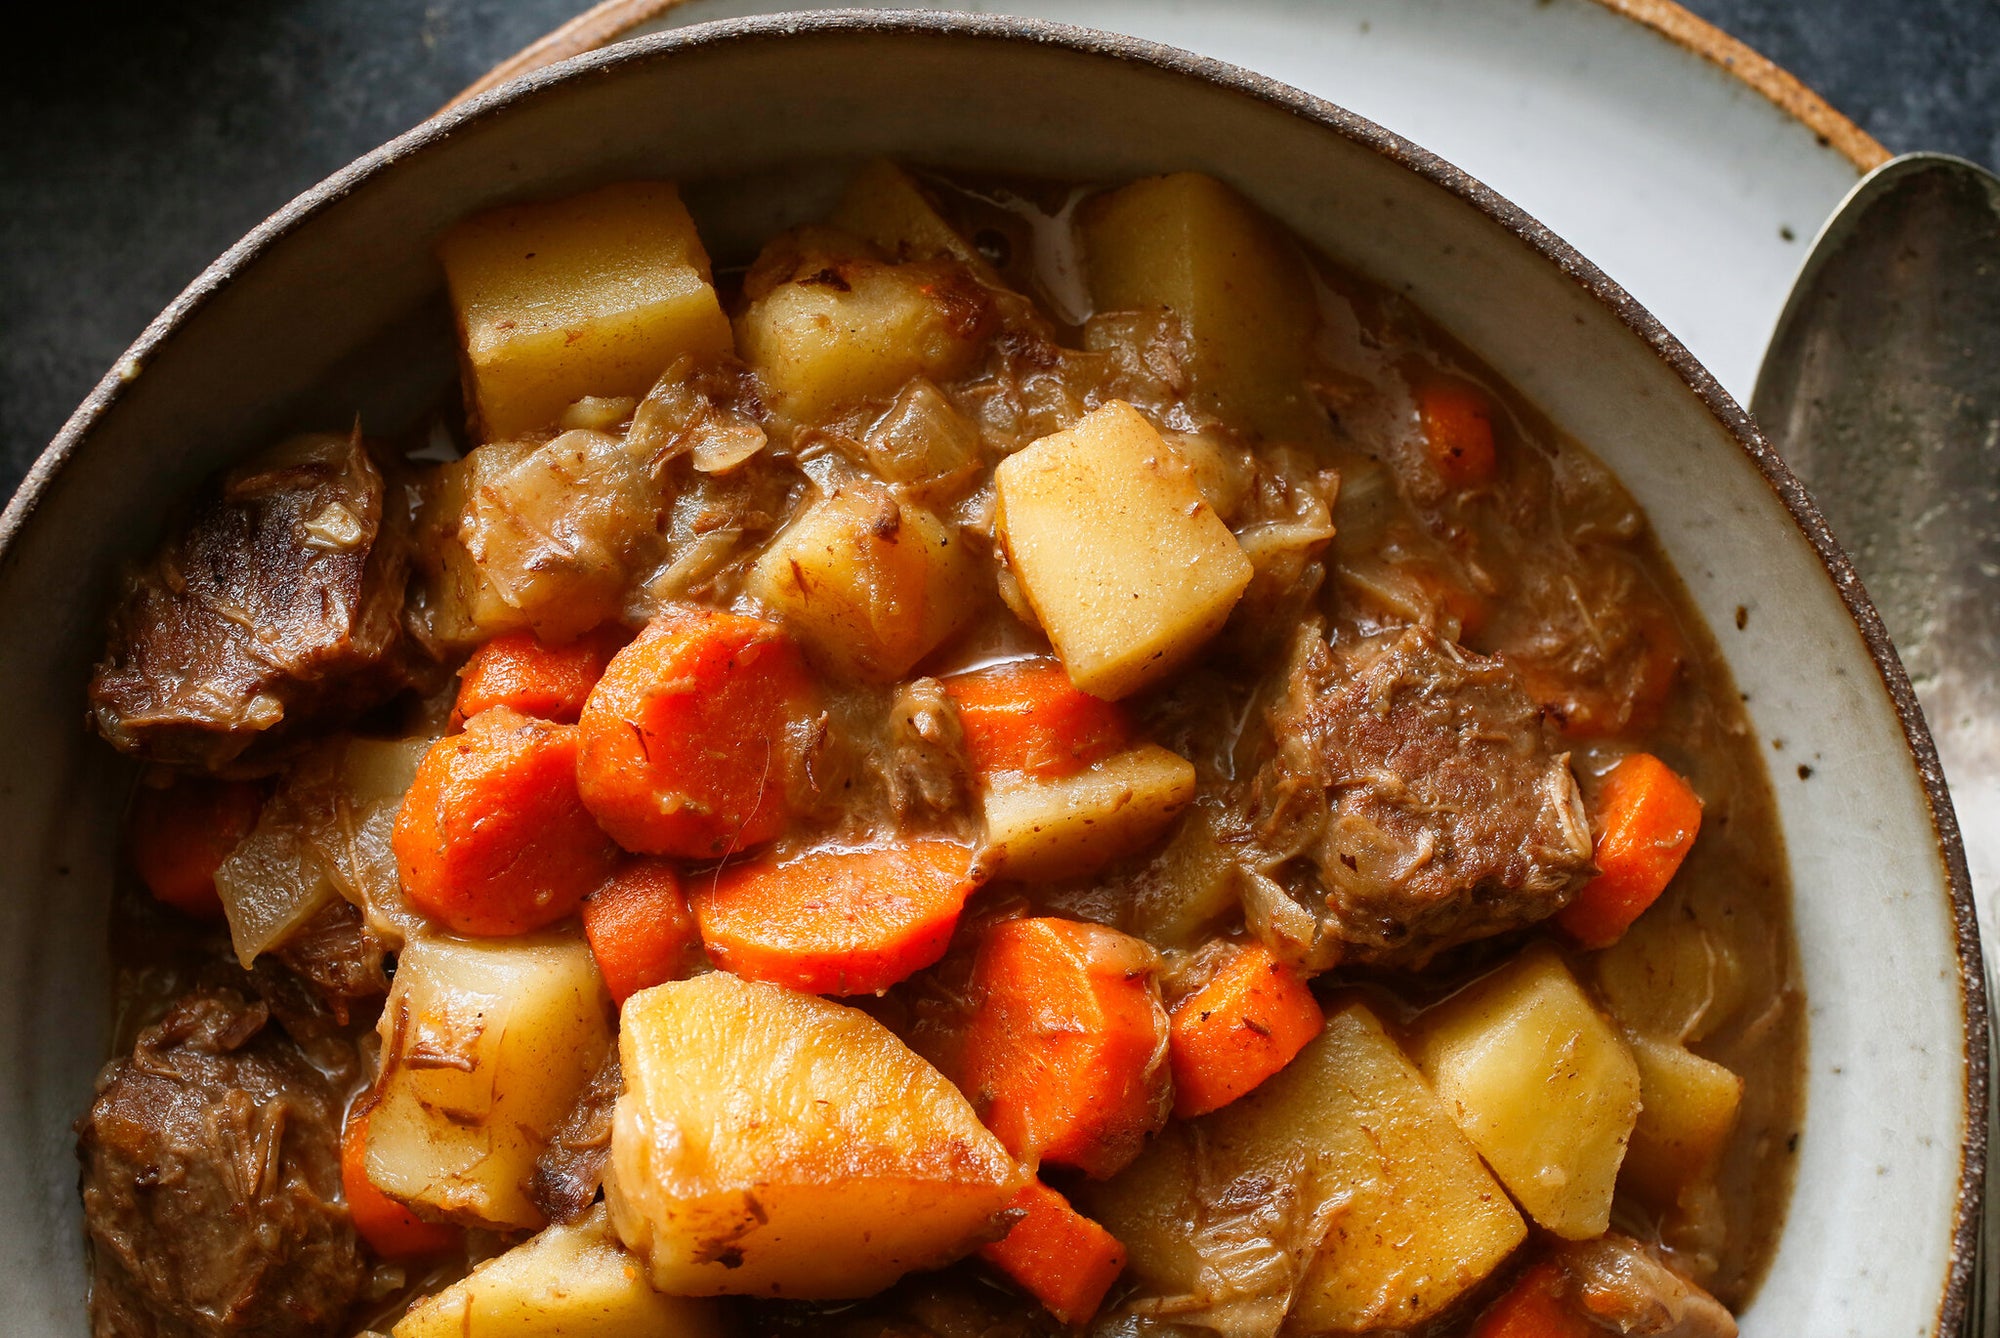 Low carb meal - Beef Stew